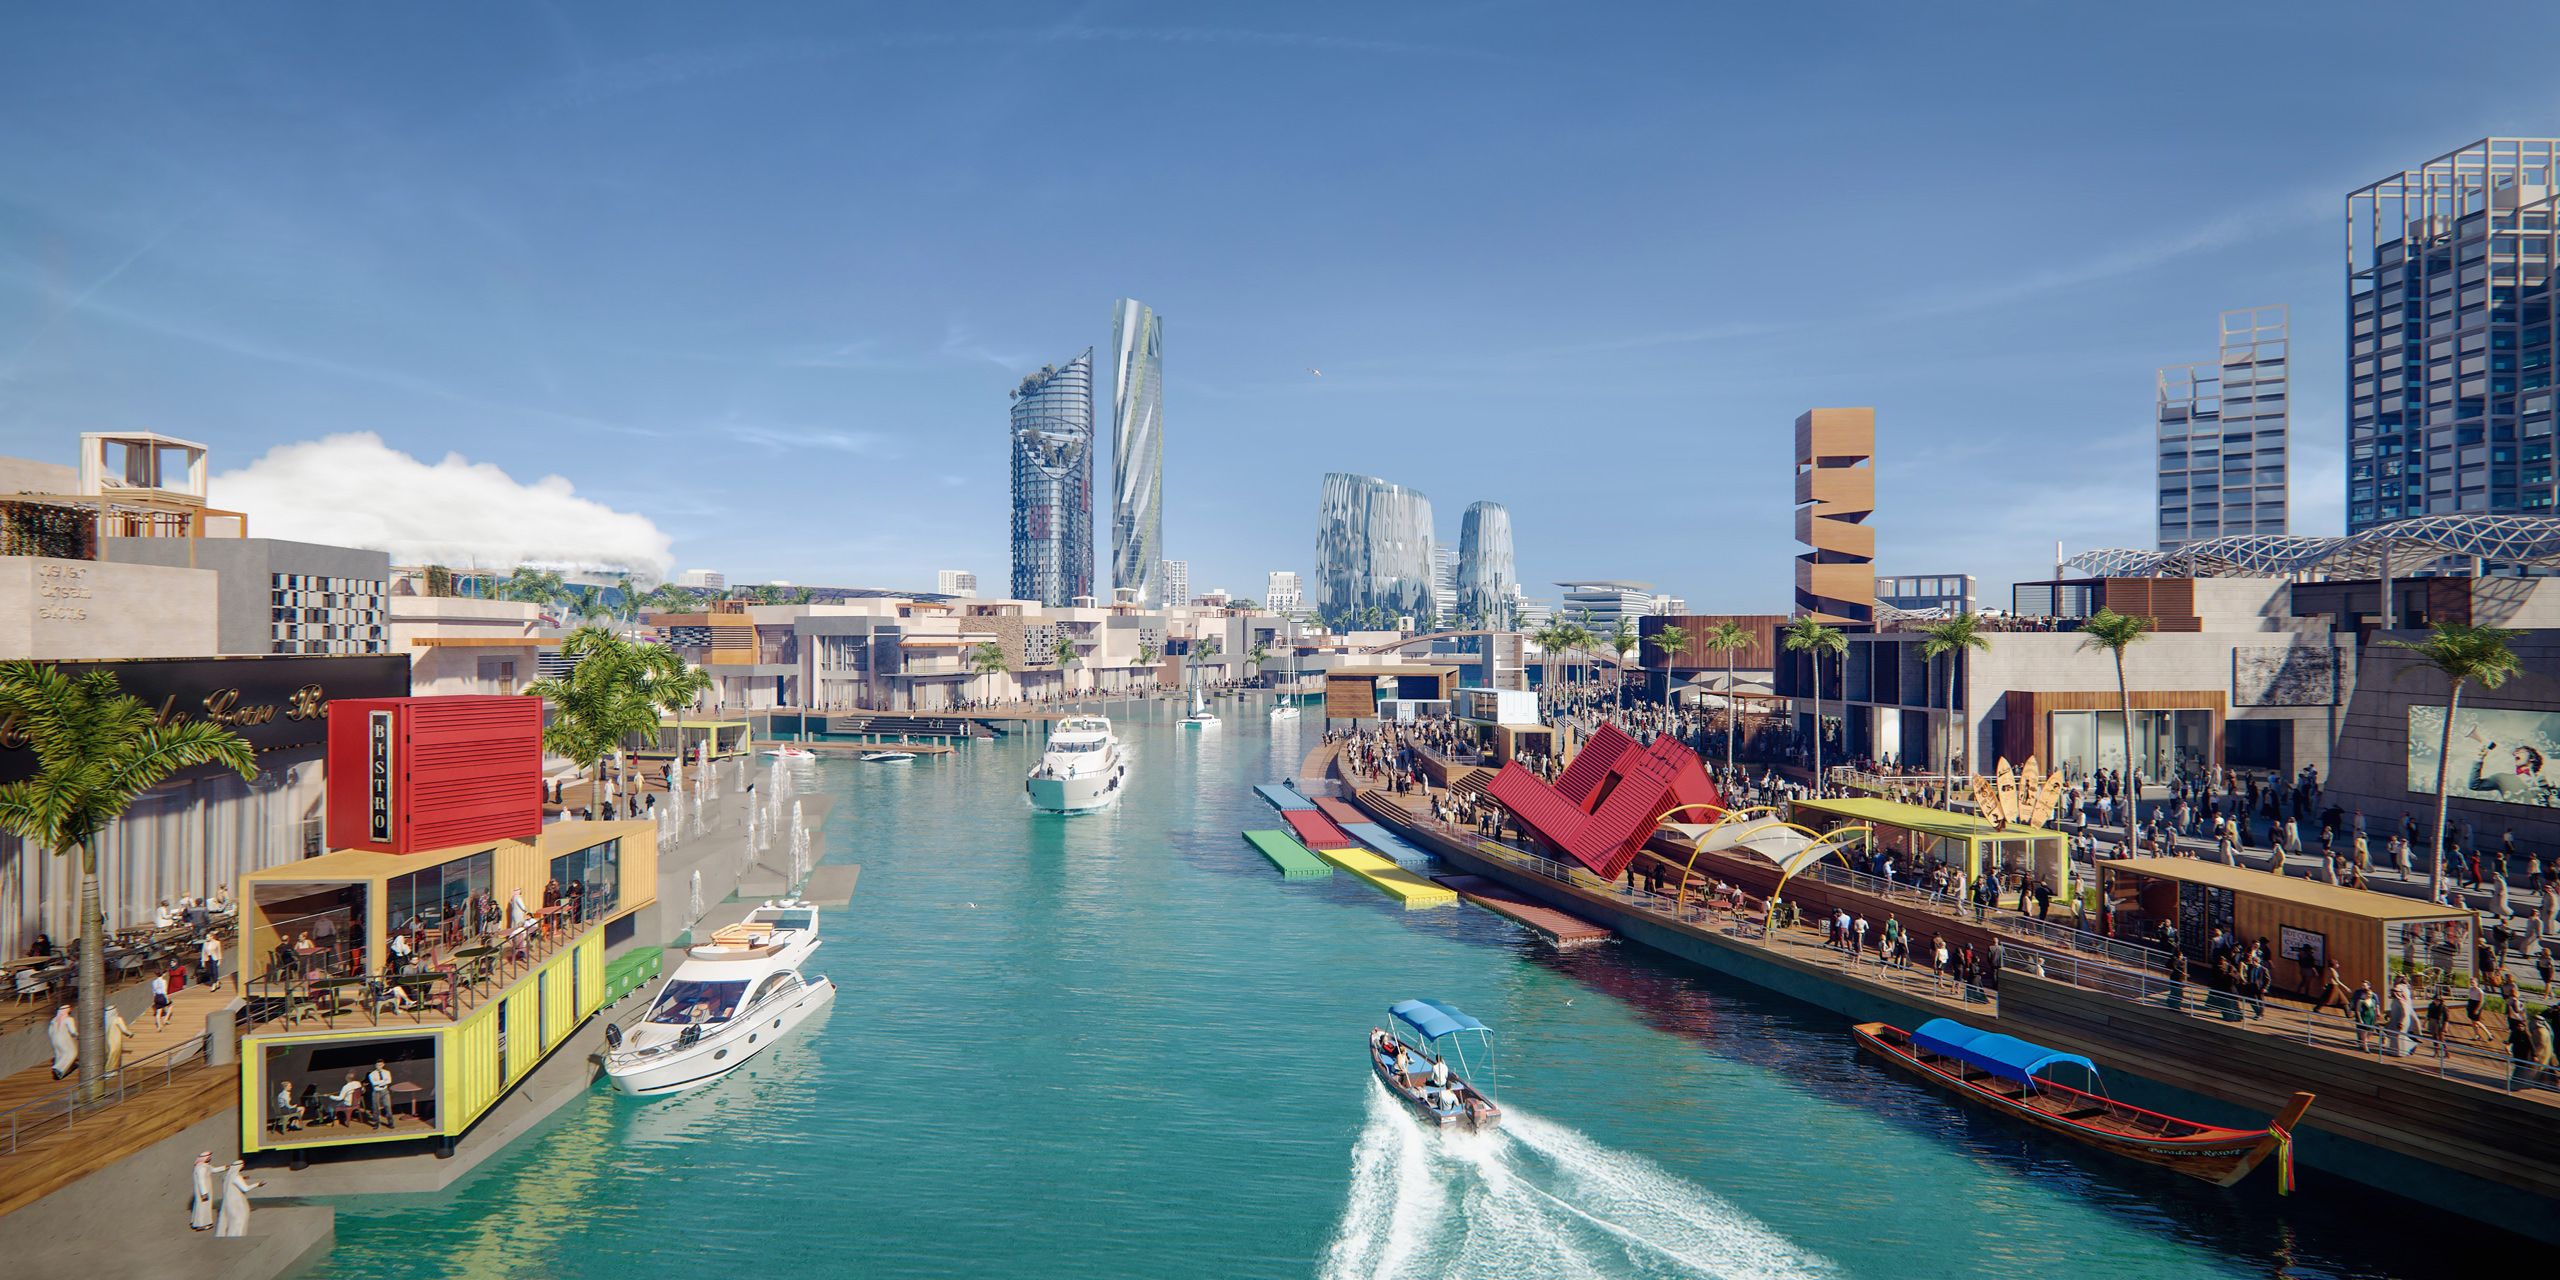 3D visualization of several retail shops by a water canal with several boats and skyscrapers in the background